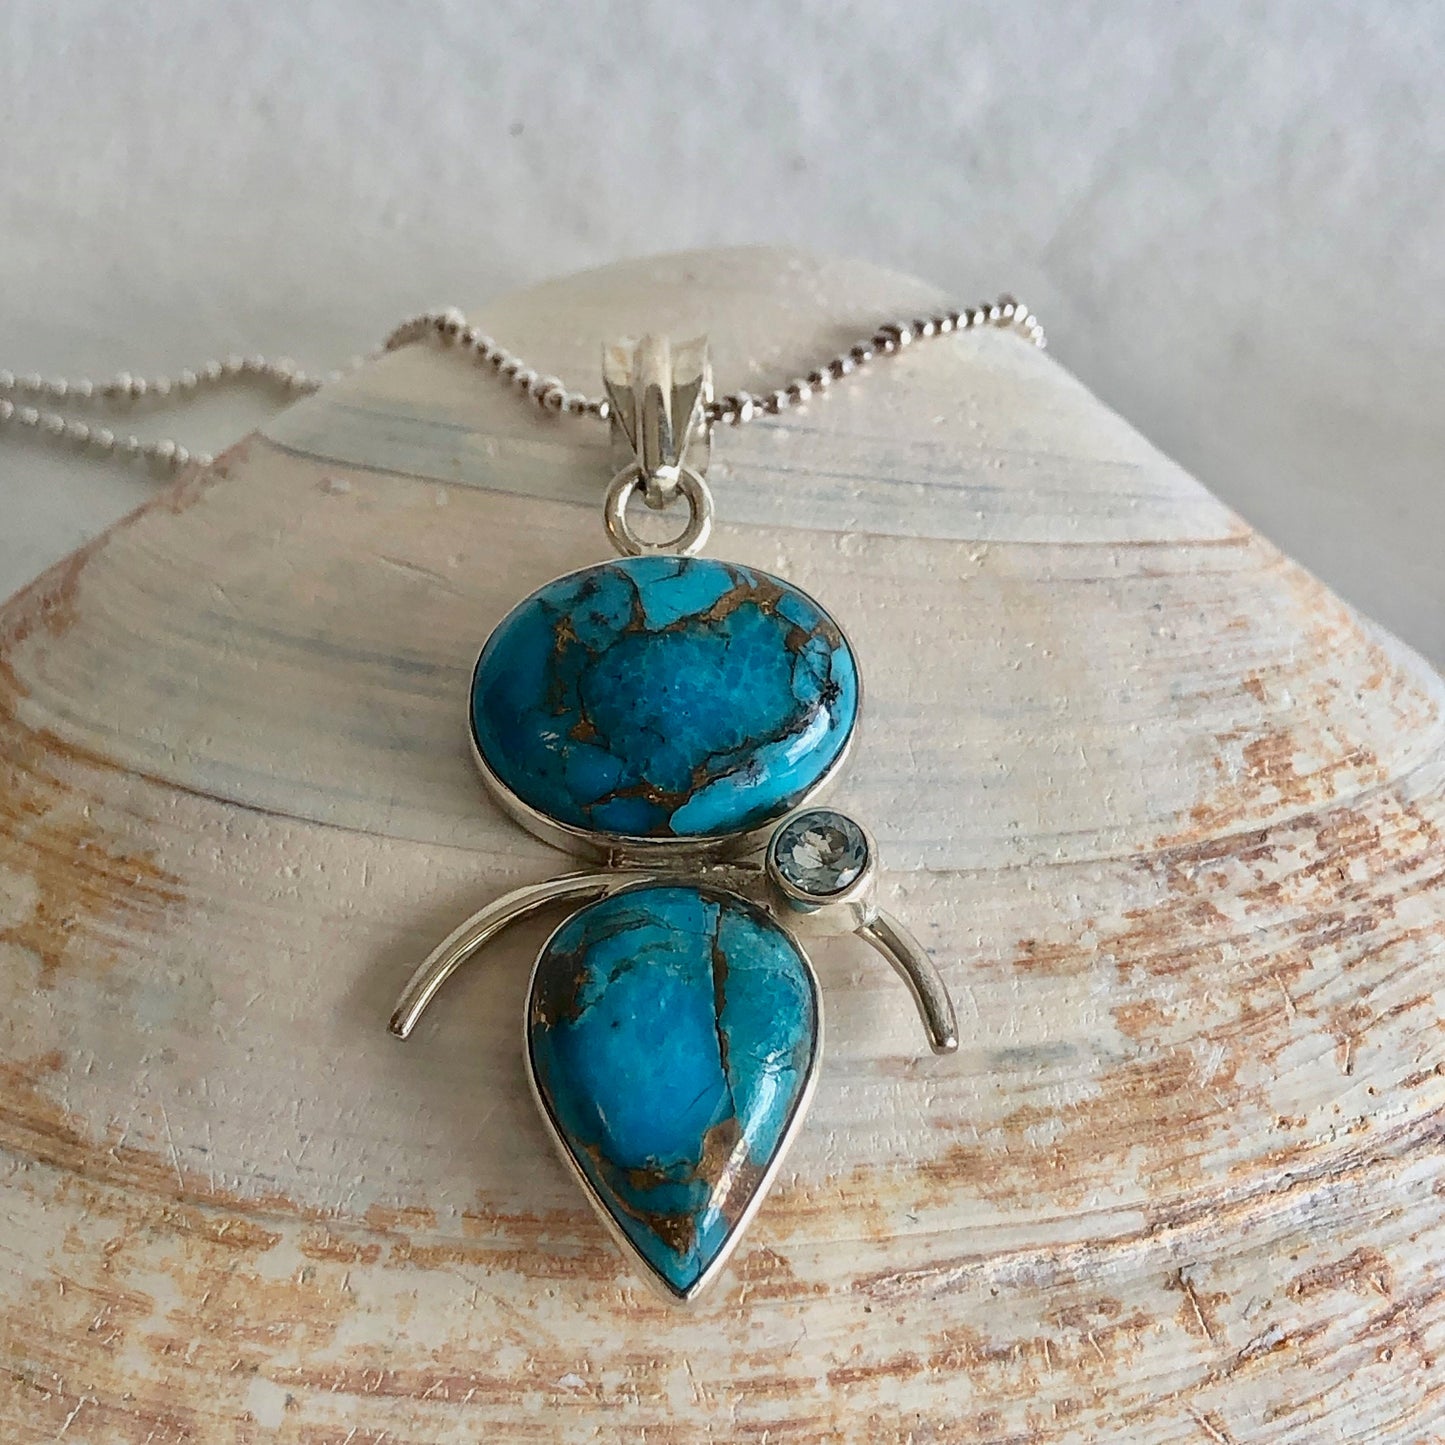 Beautiful turquoise and copper, and quartz pendant. Gift for women, birthday gift, gift for anything!